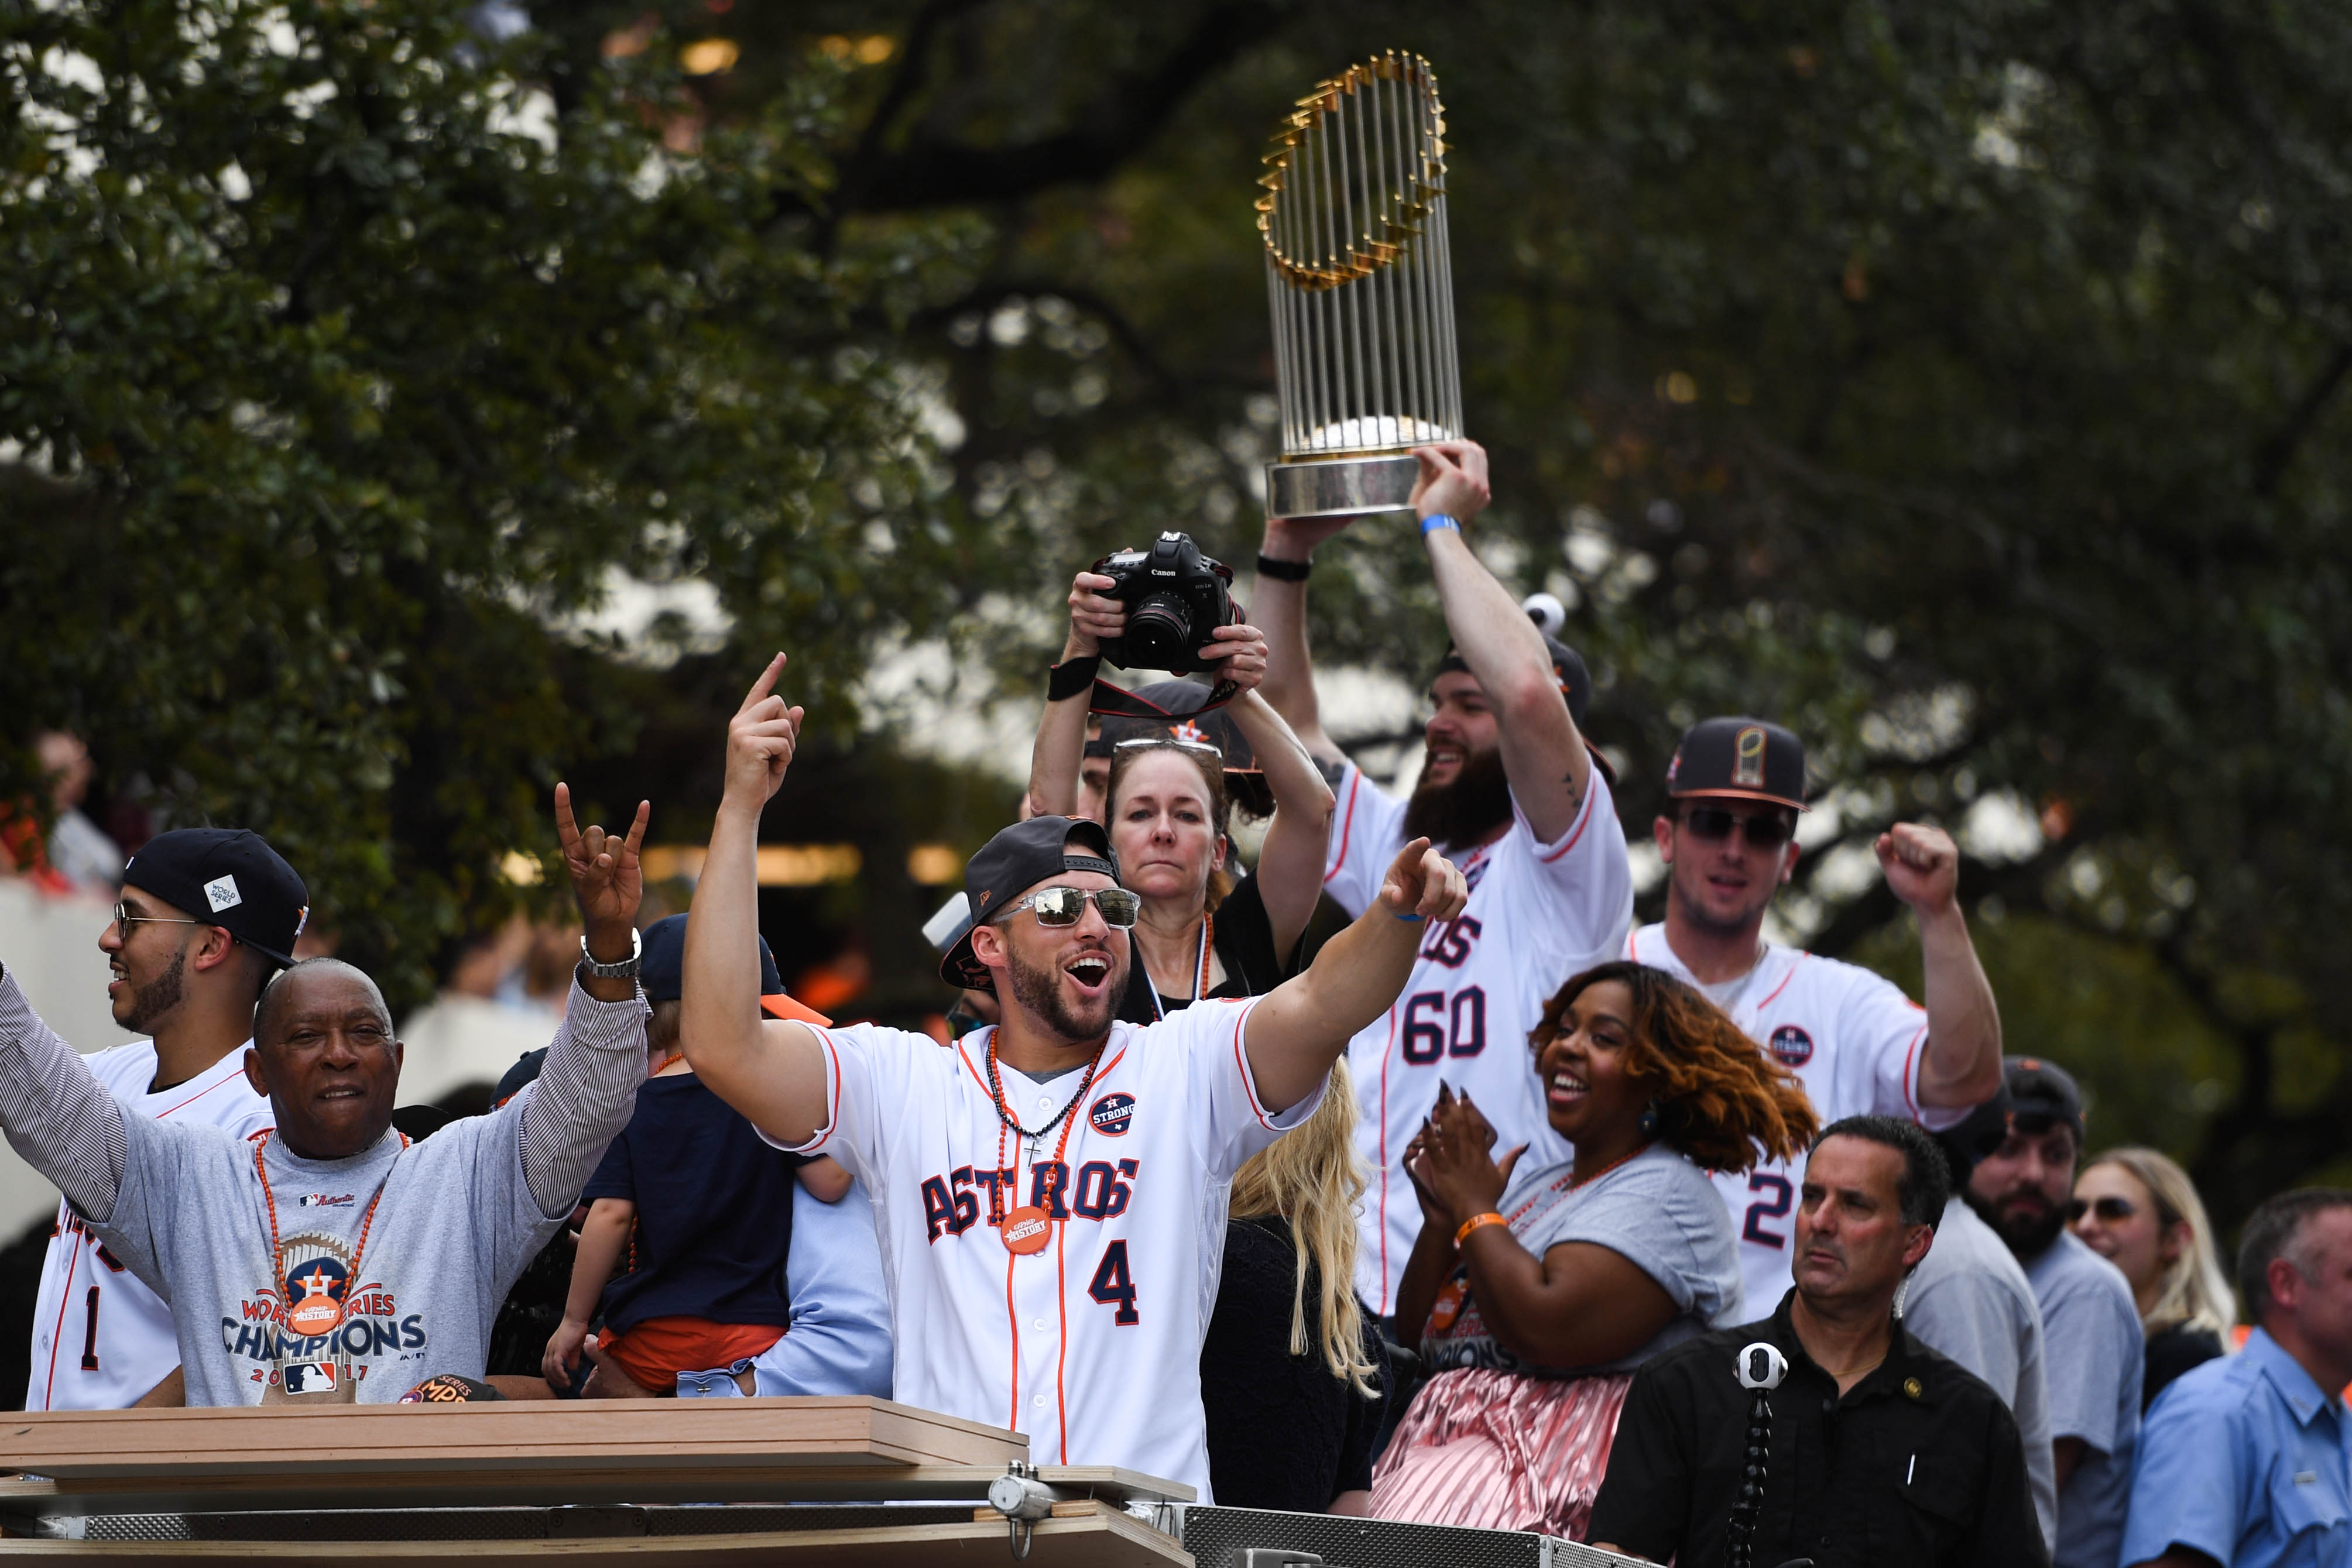 15 of the best photos from the Houston Astros' World Series parade